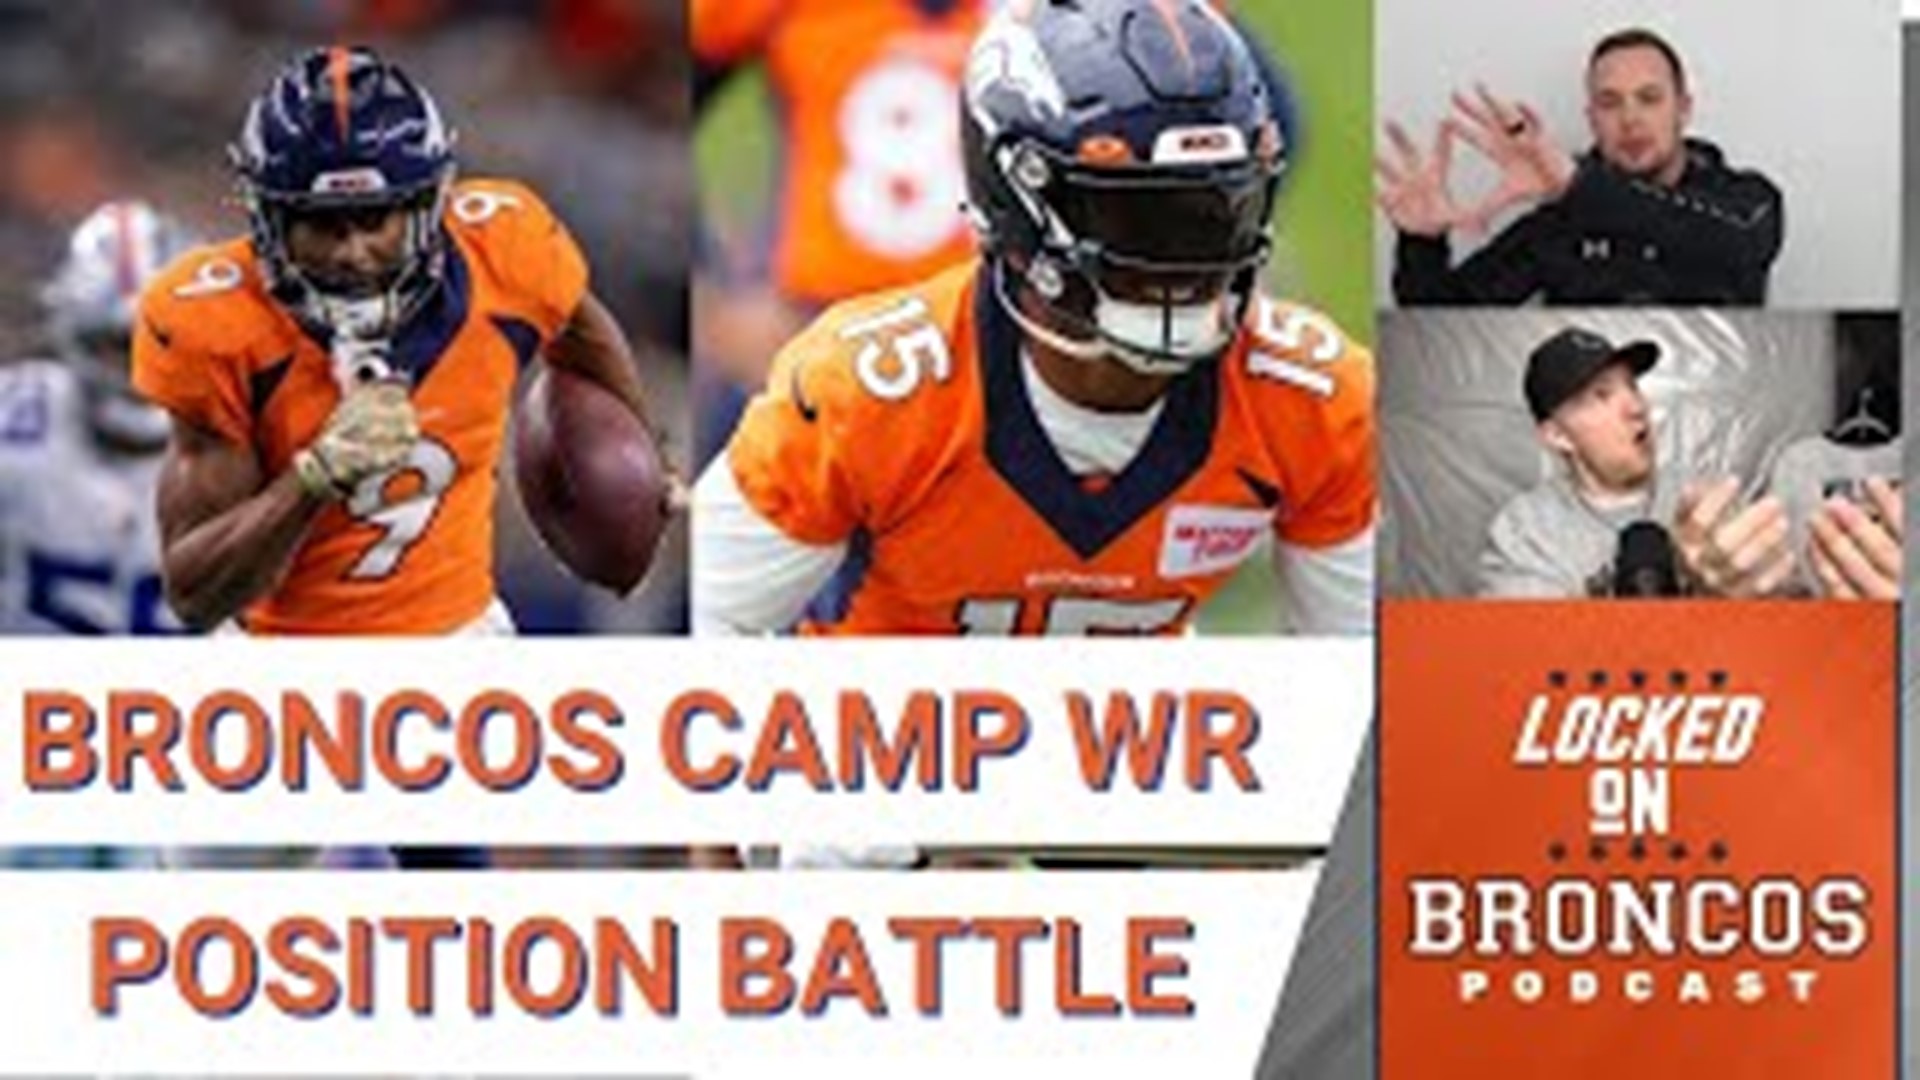 The Denver Broncos are set to report for training camp on July 26 at the UCHealth Training Center.